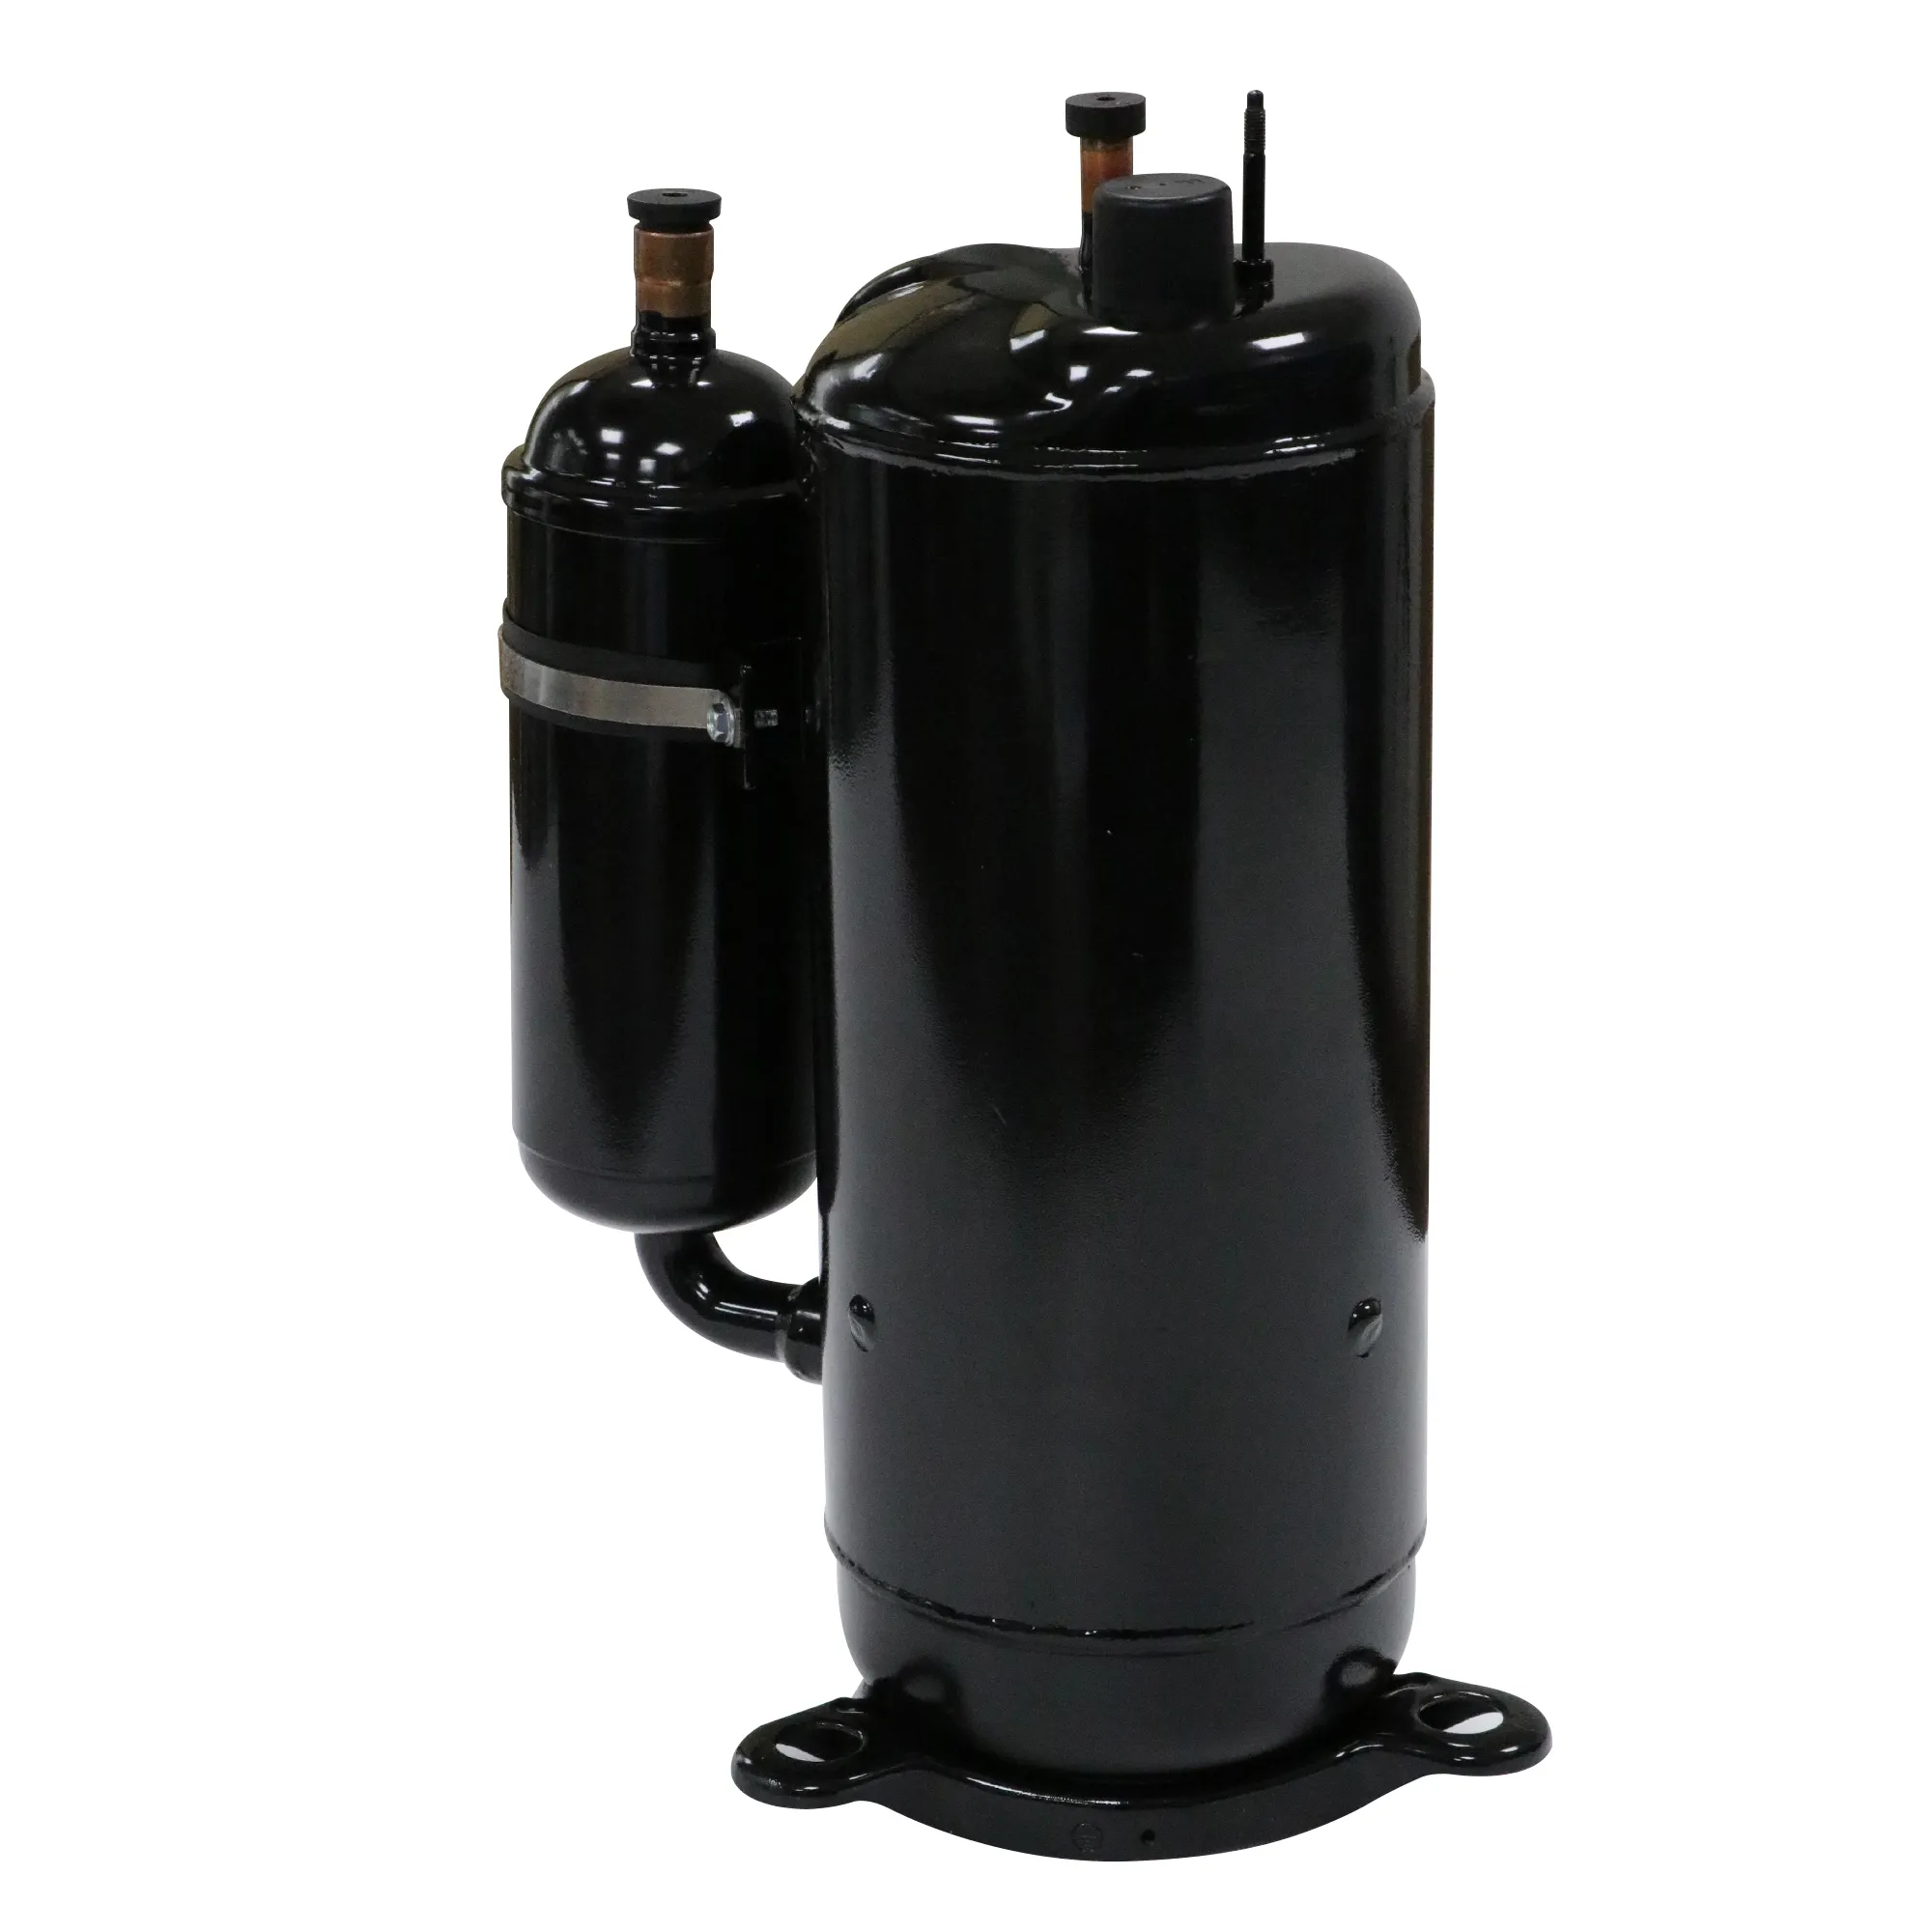 Highly Rotary R410A 208/230V/60Hz/1PH 11500BTU Air Conditioning Compressor Model ASG112UN-A6DH With Good Price